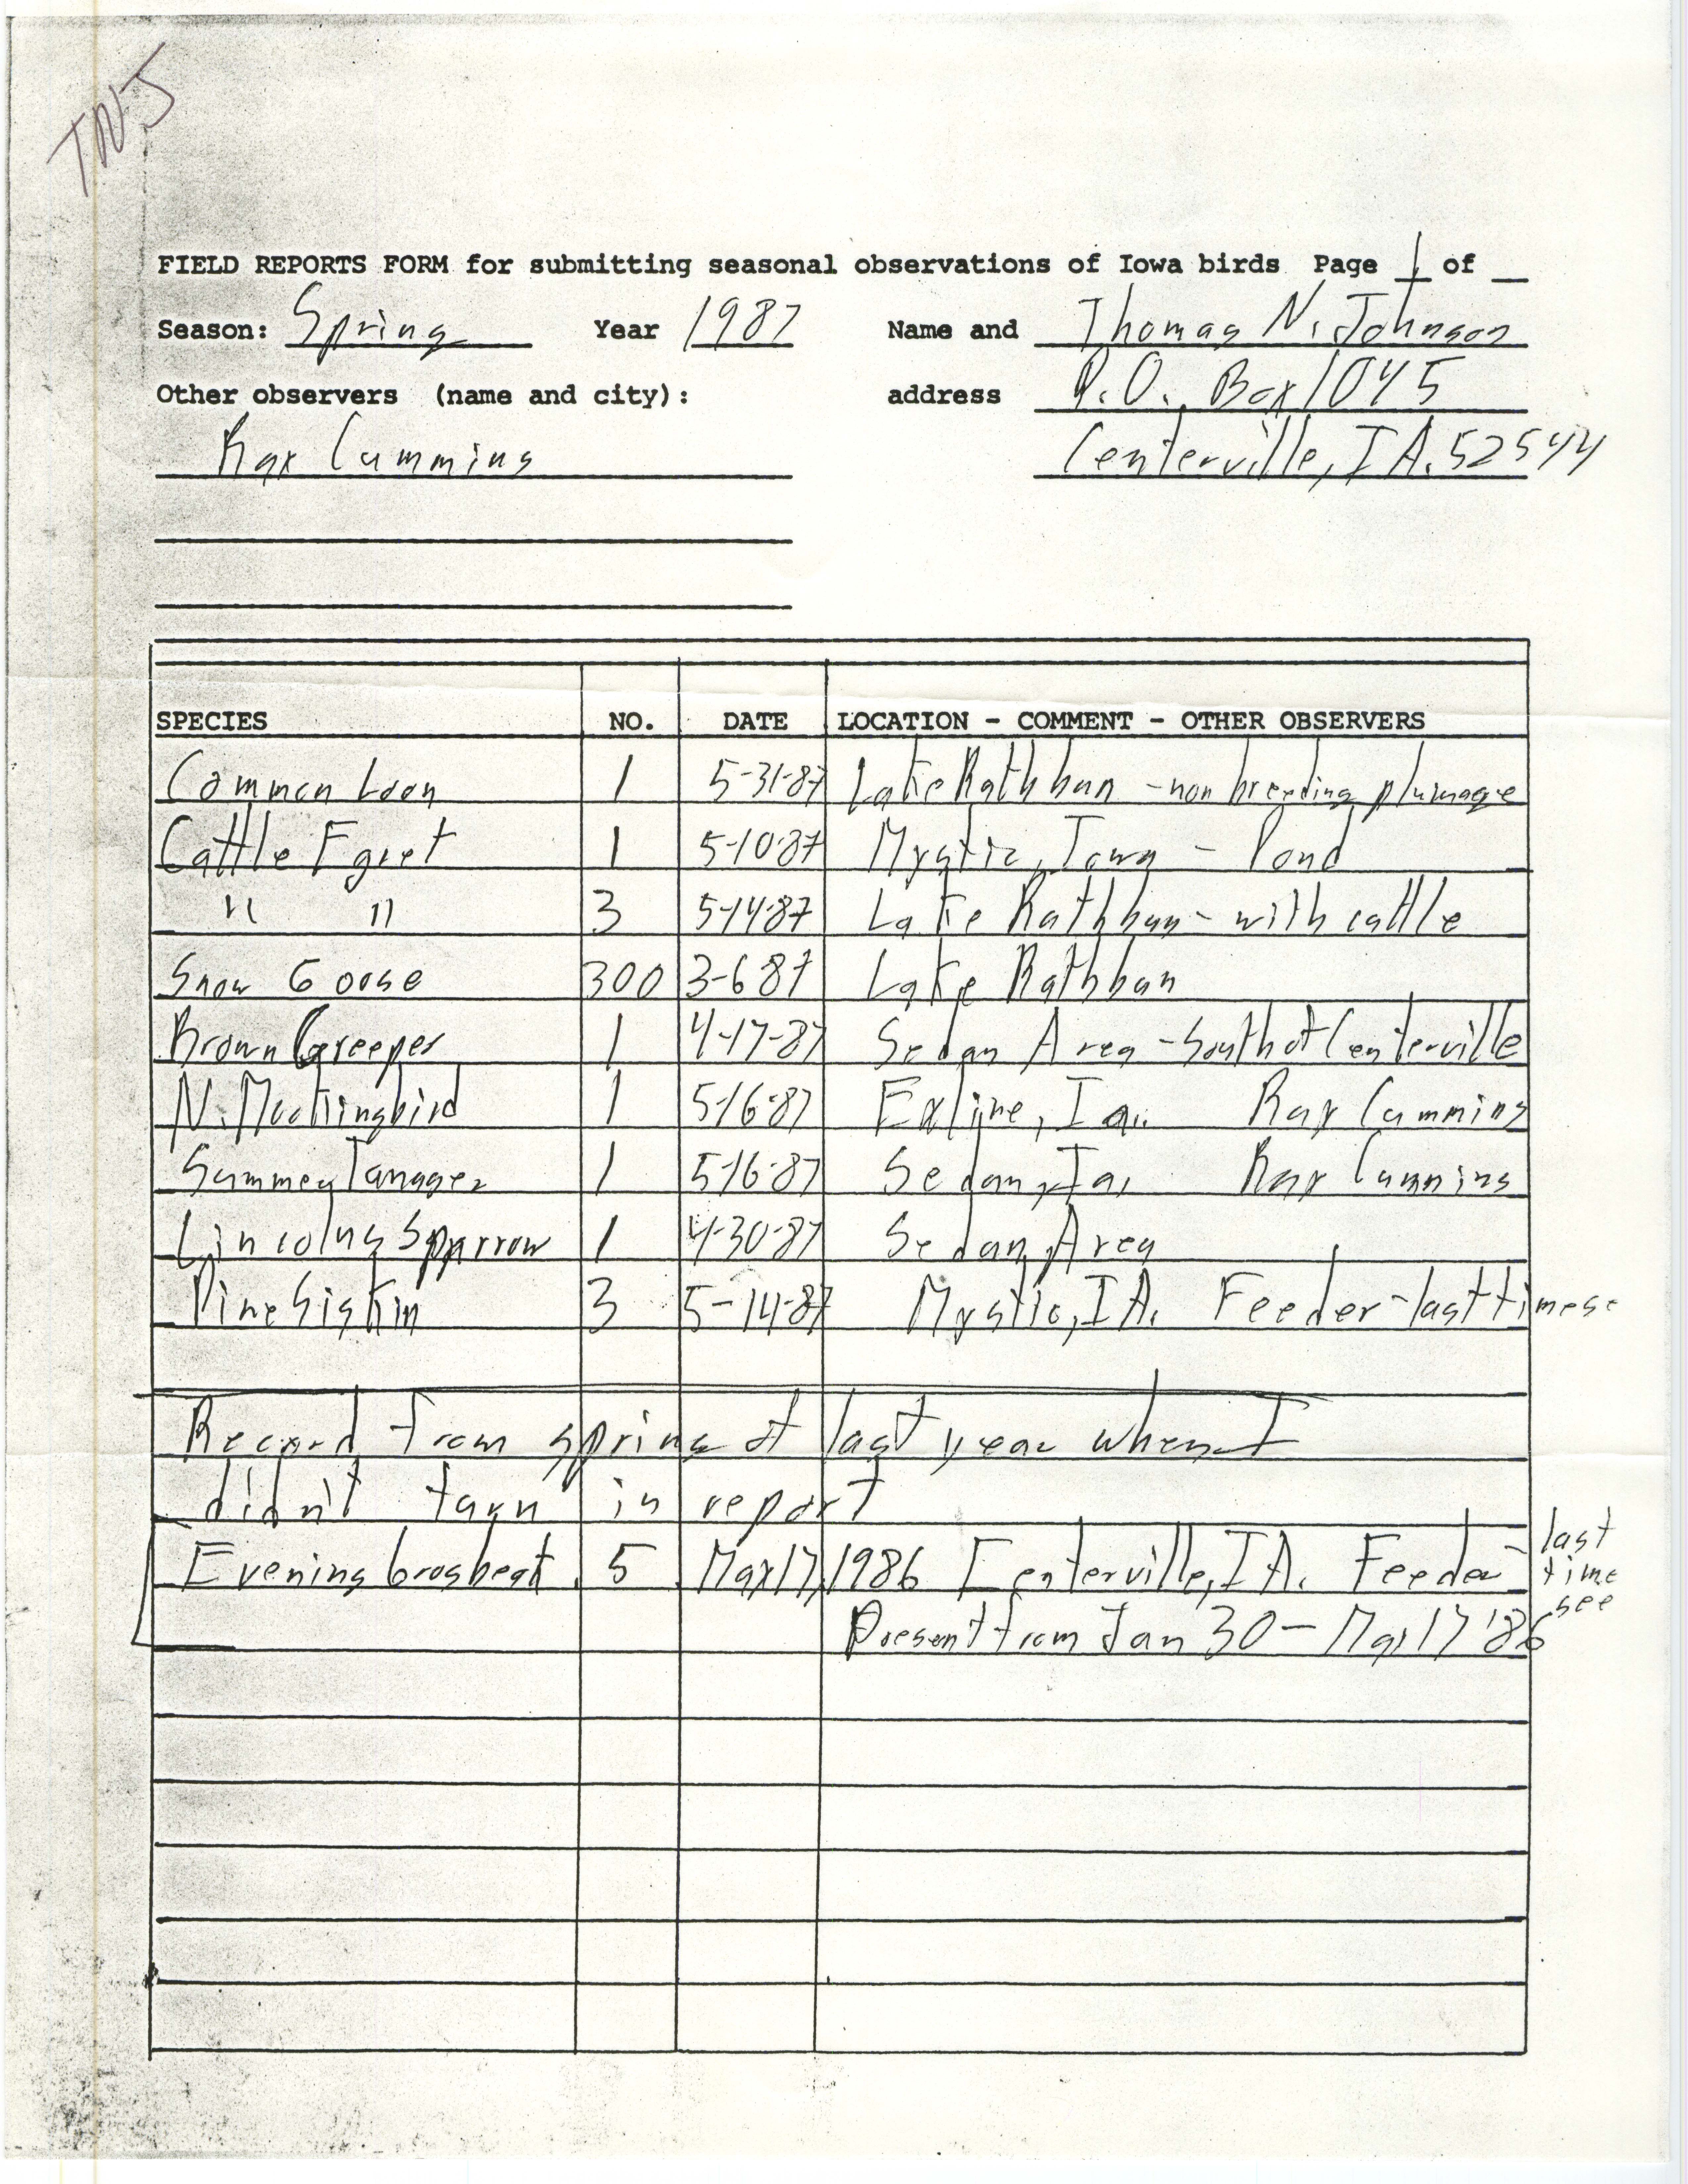 Field reports form for submitting seasonal observations of Iowa birds, Tom Johnson, spring 1987